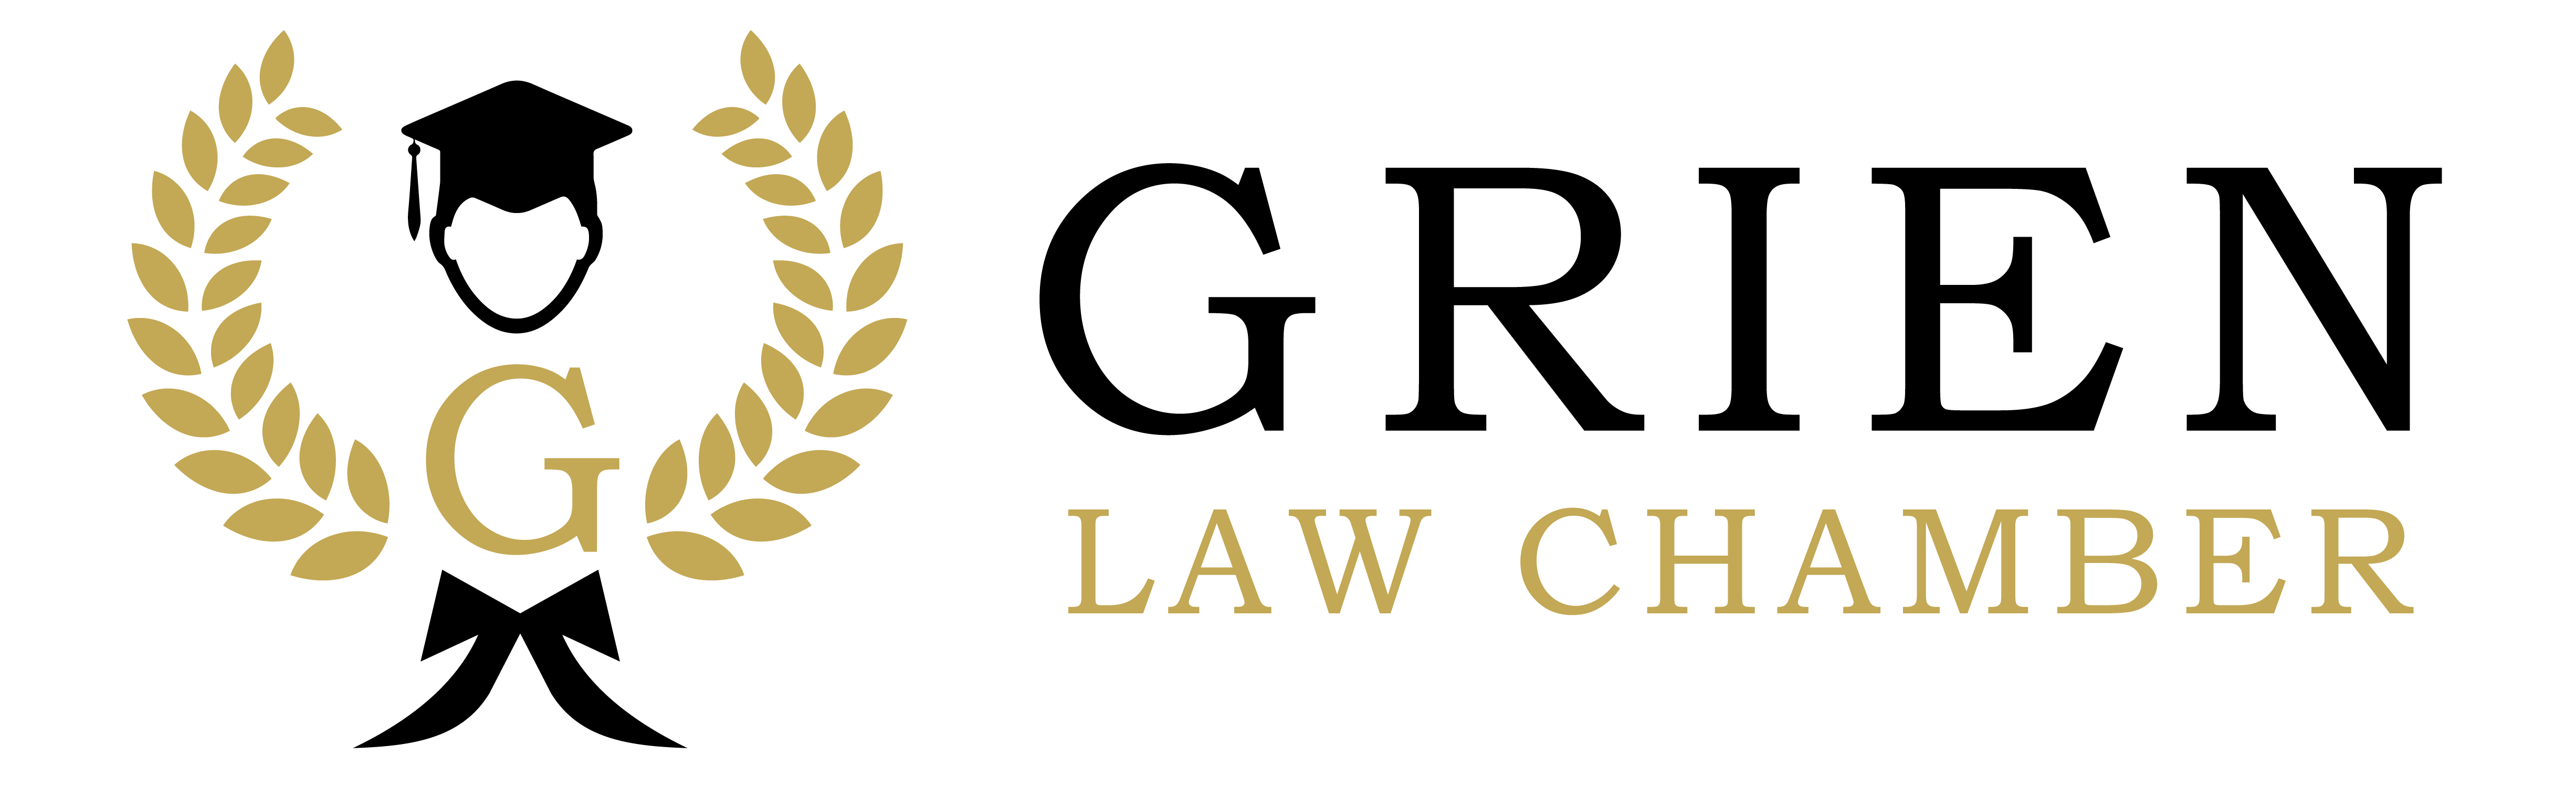 Grien Law Chamber